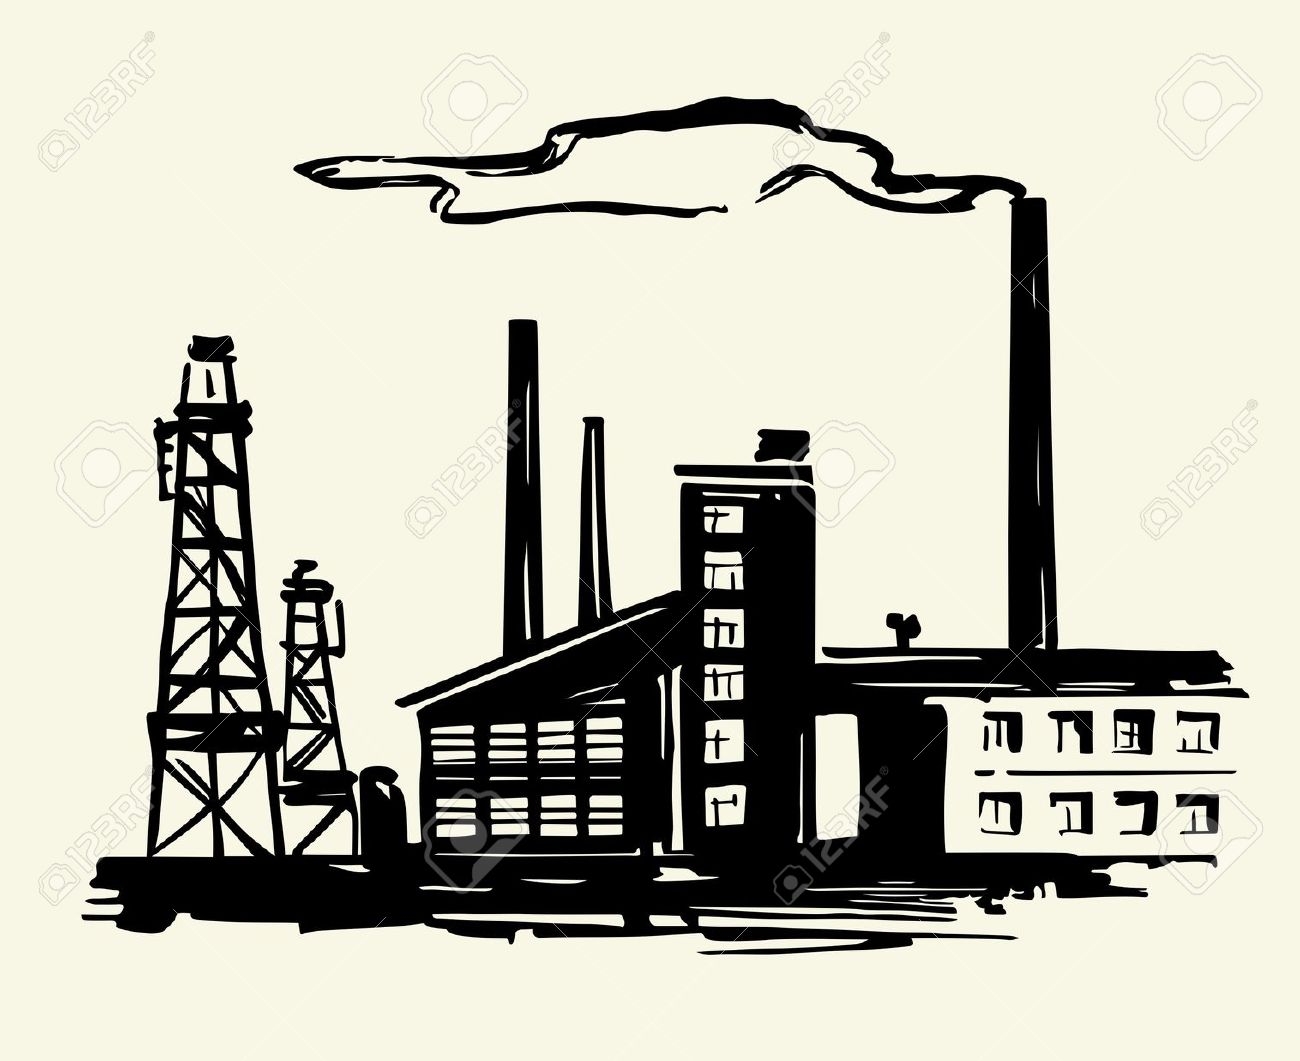 Factory building with smoke stacks clipart.